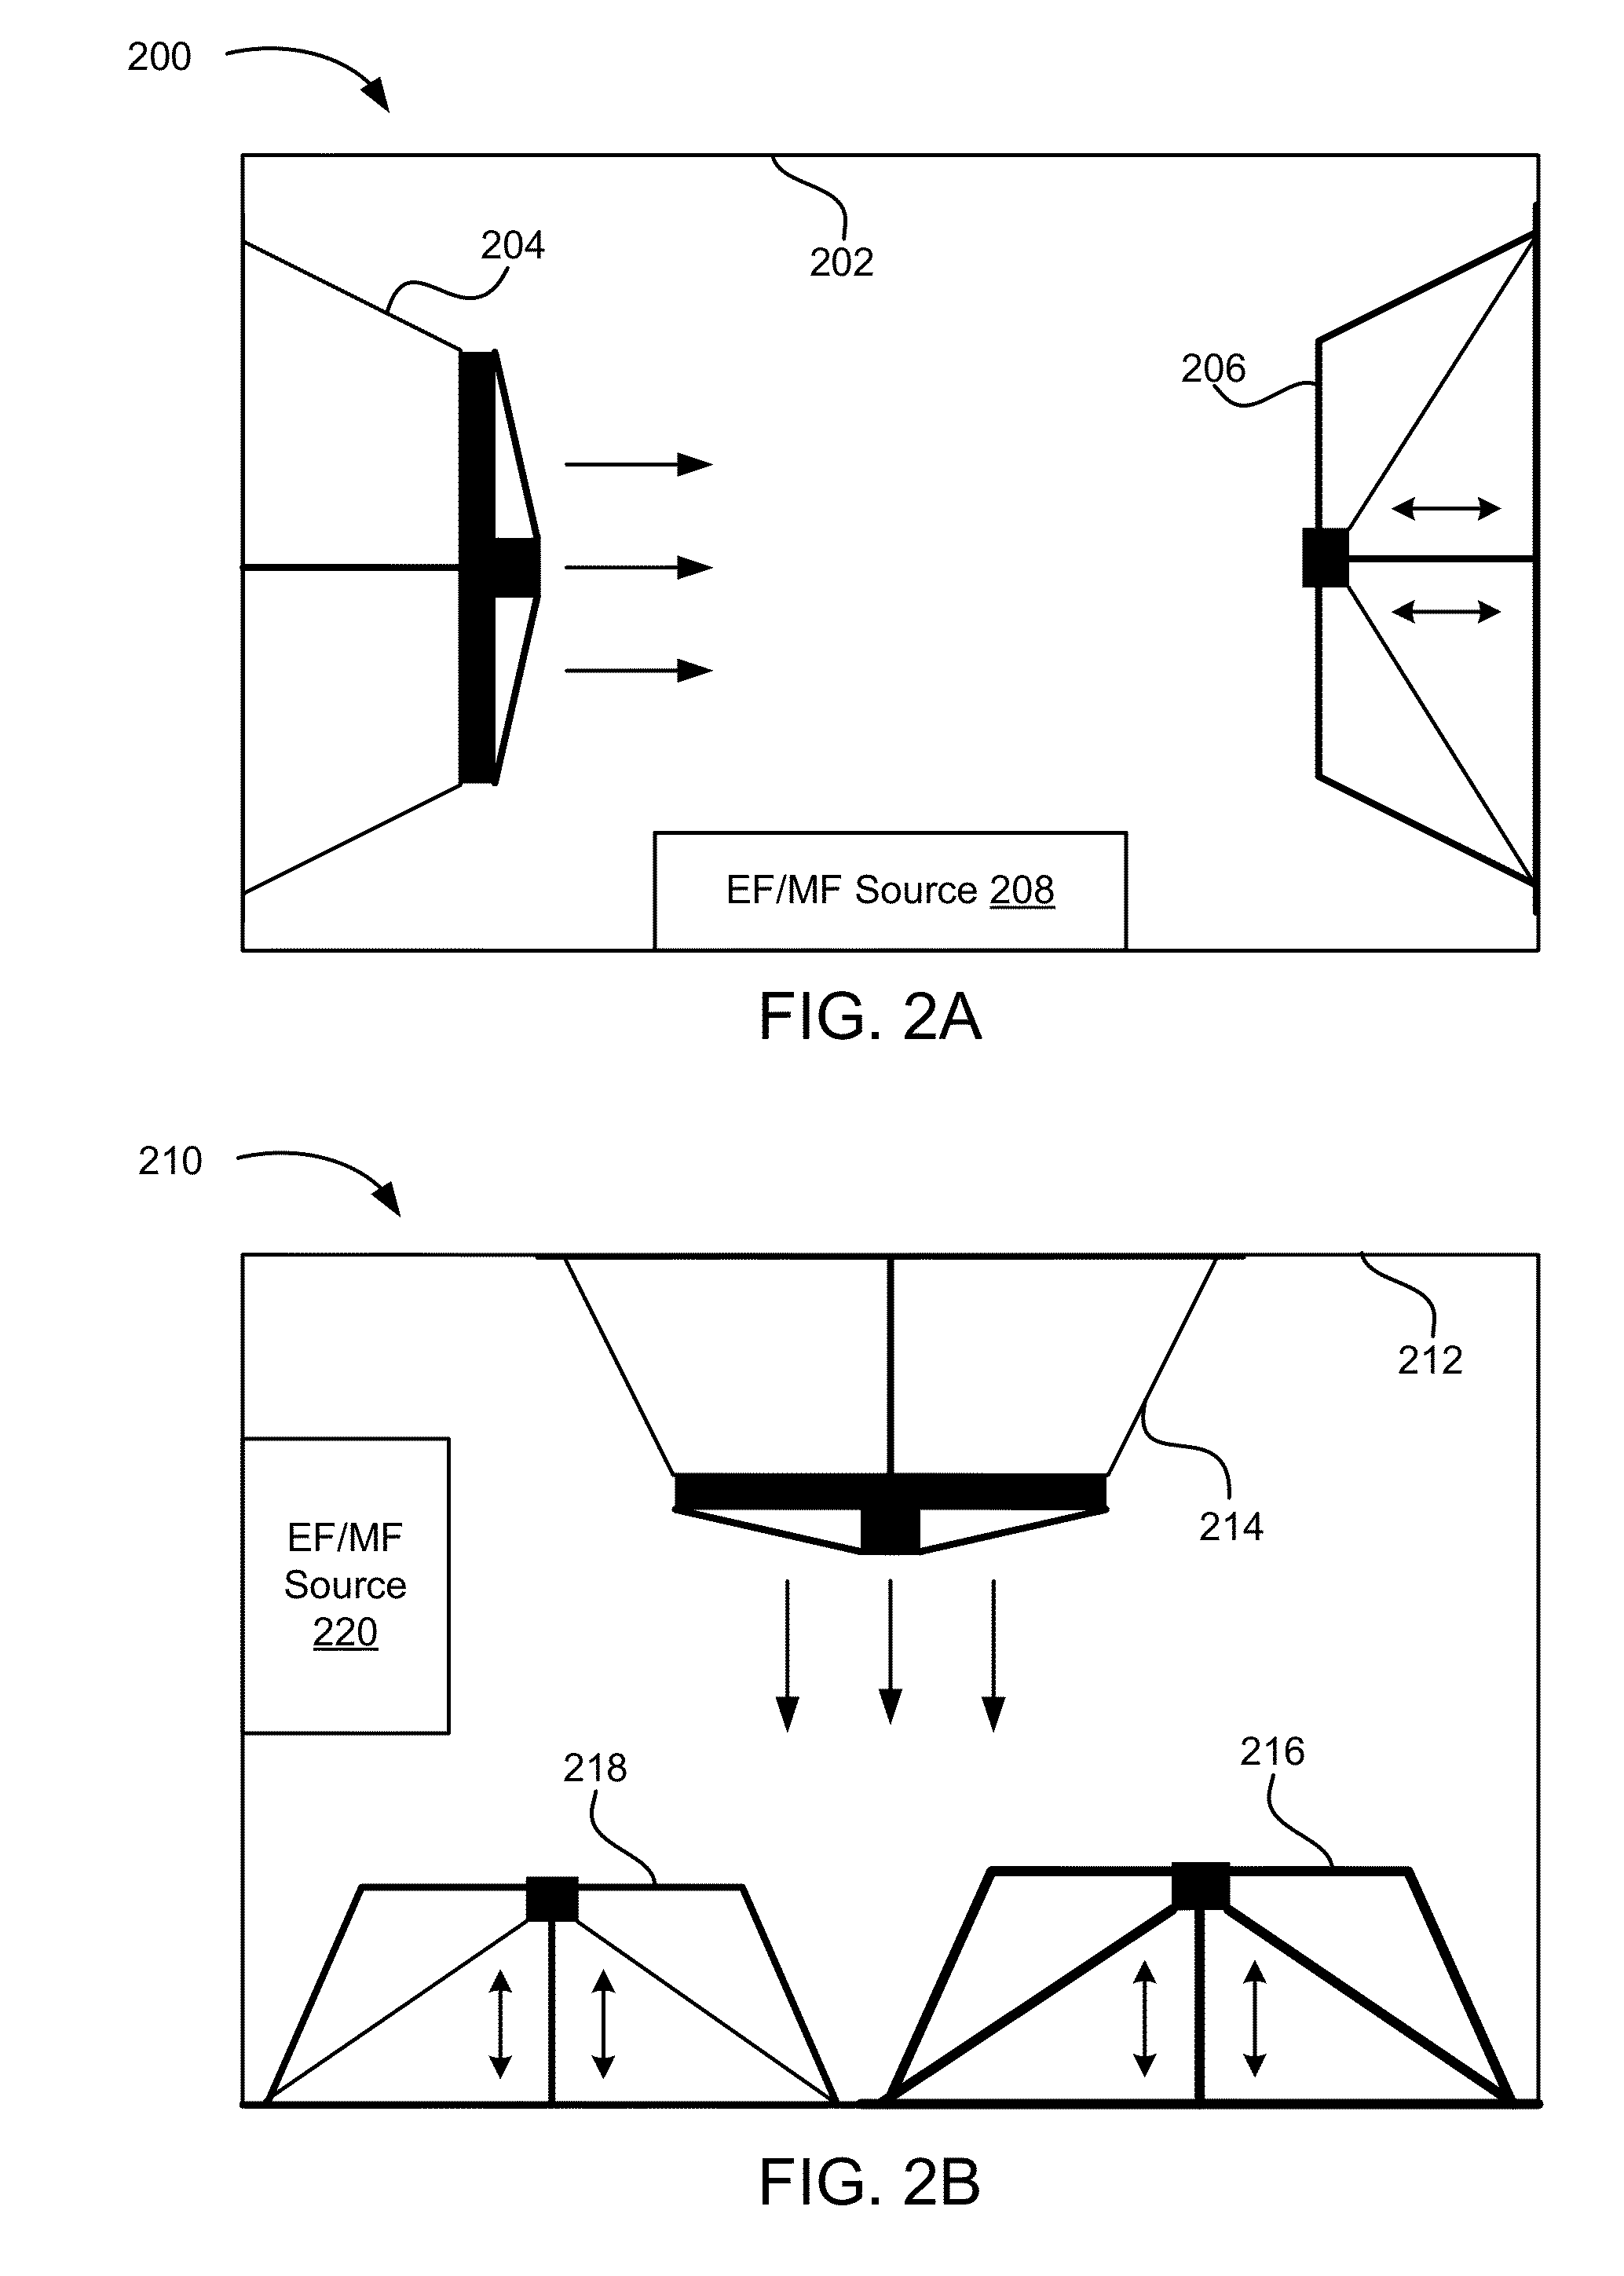 Structures for dynamically tuned audio in a media device